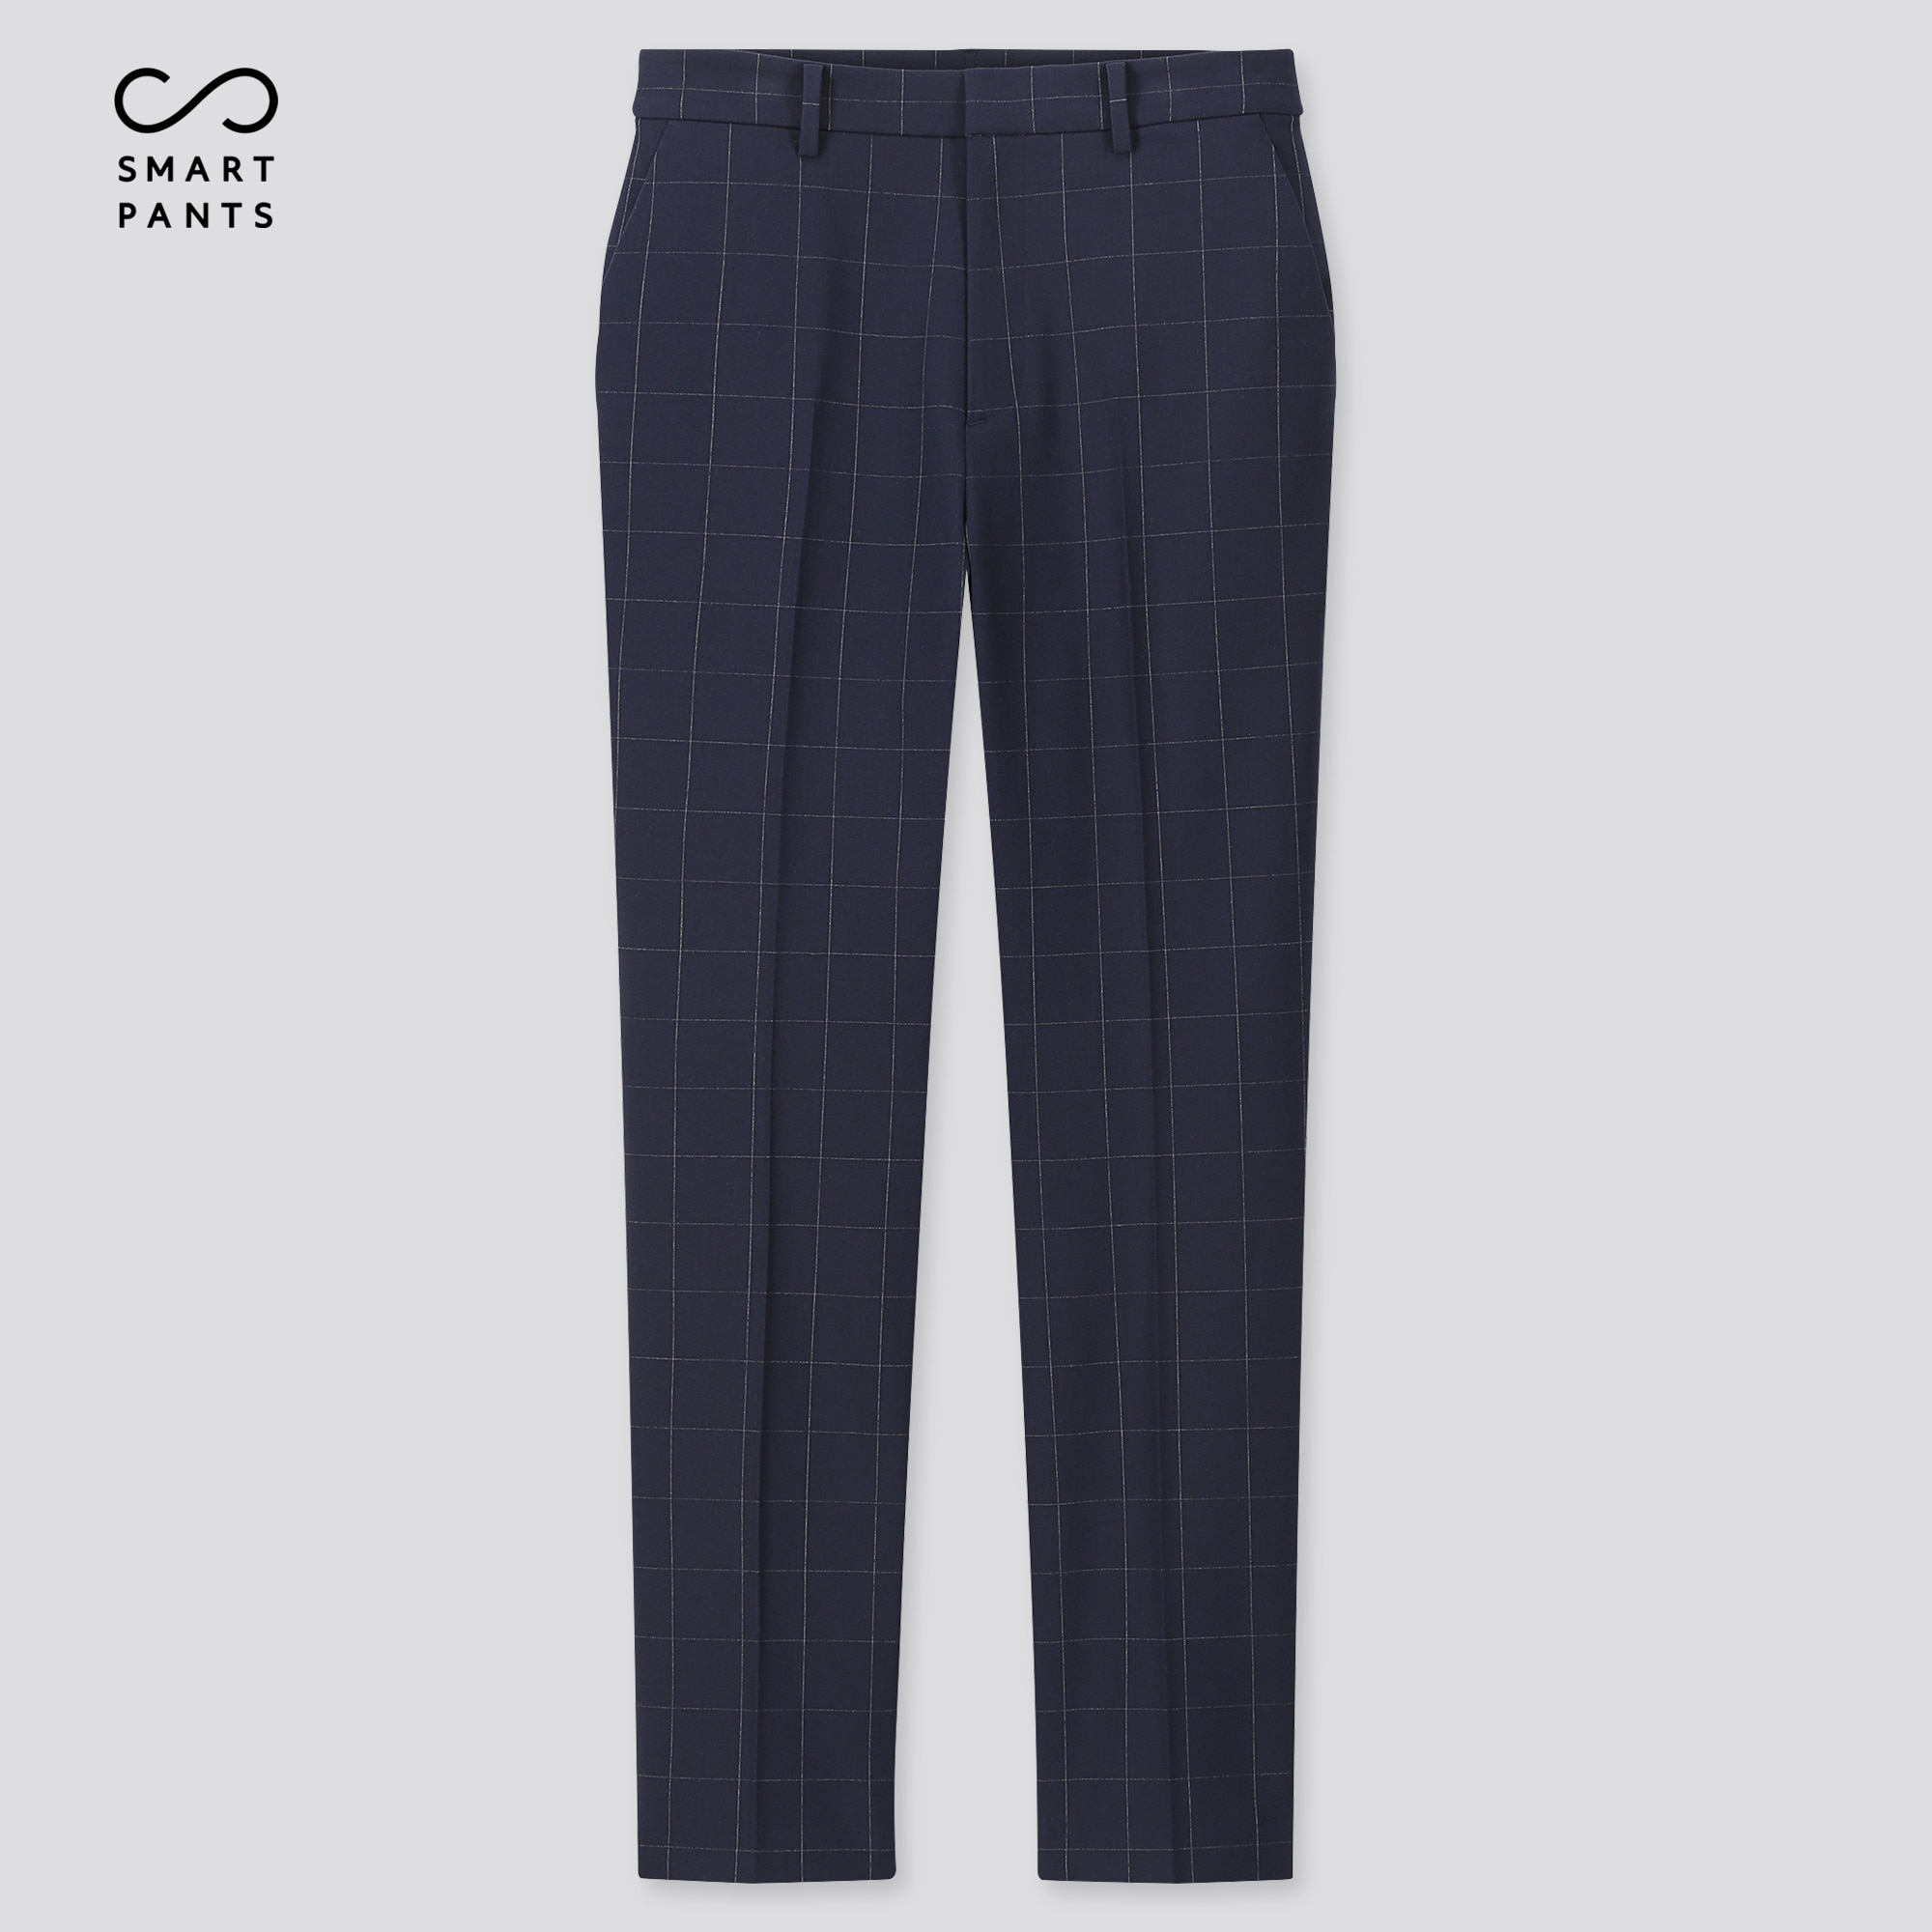 Suria Sabah Shopping Mall - Back to work with UNIQLO EZY Ankle Pants for  the utmost comfort. EZY Ankle Pants are made with multiway stretch material  where it is easy to slip